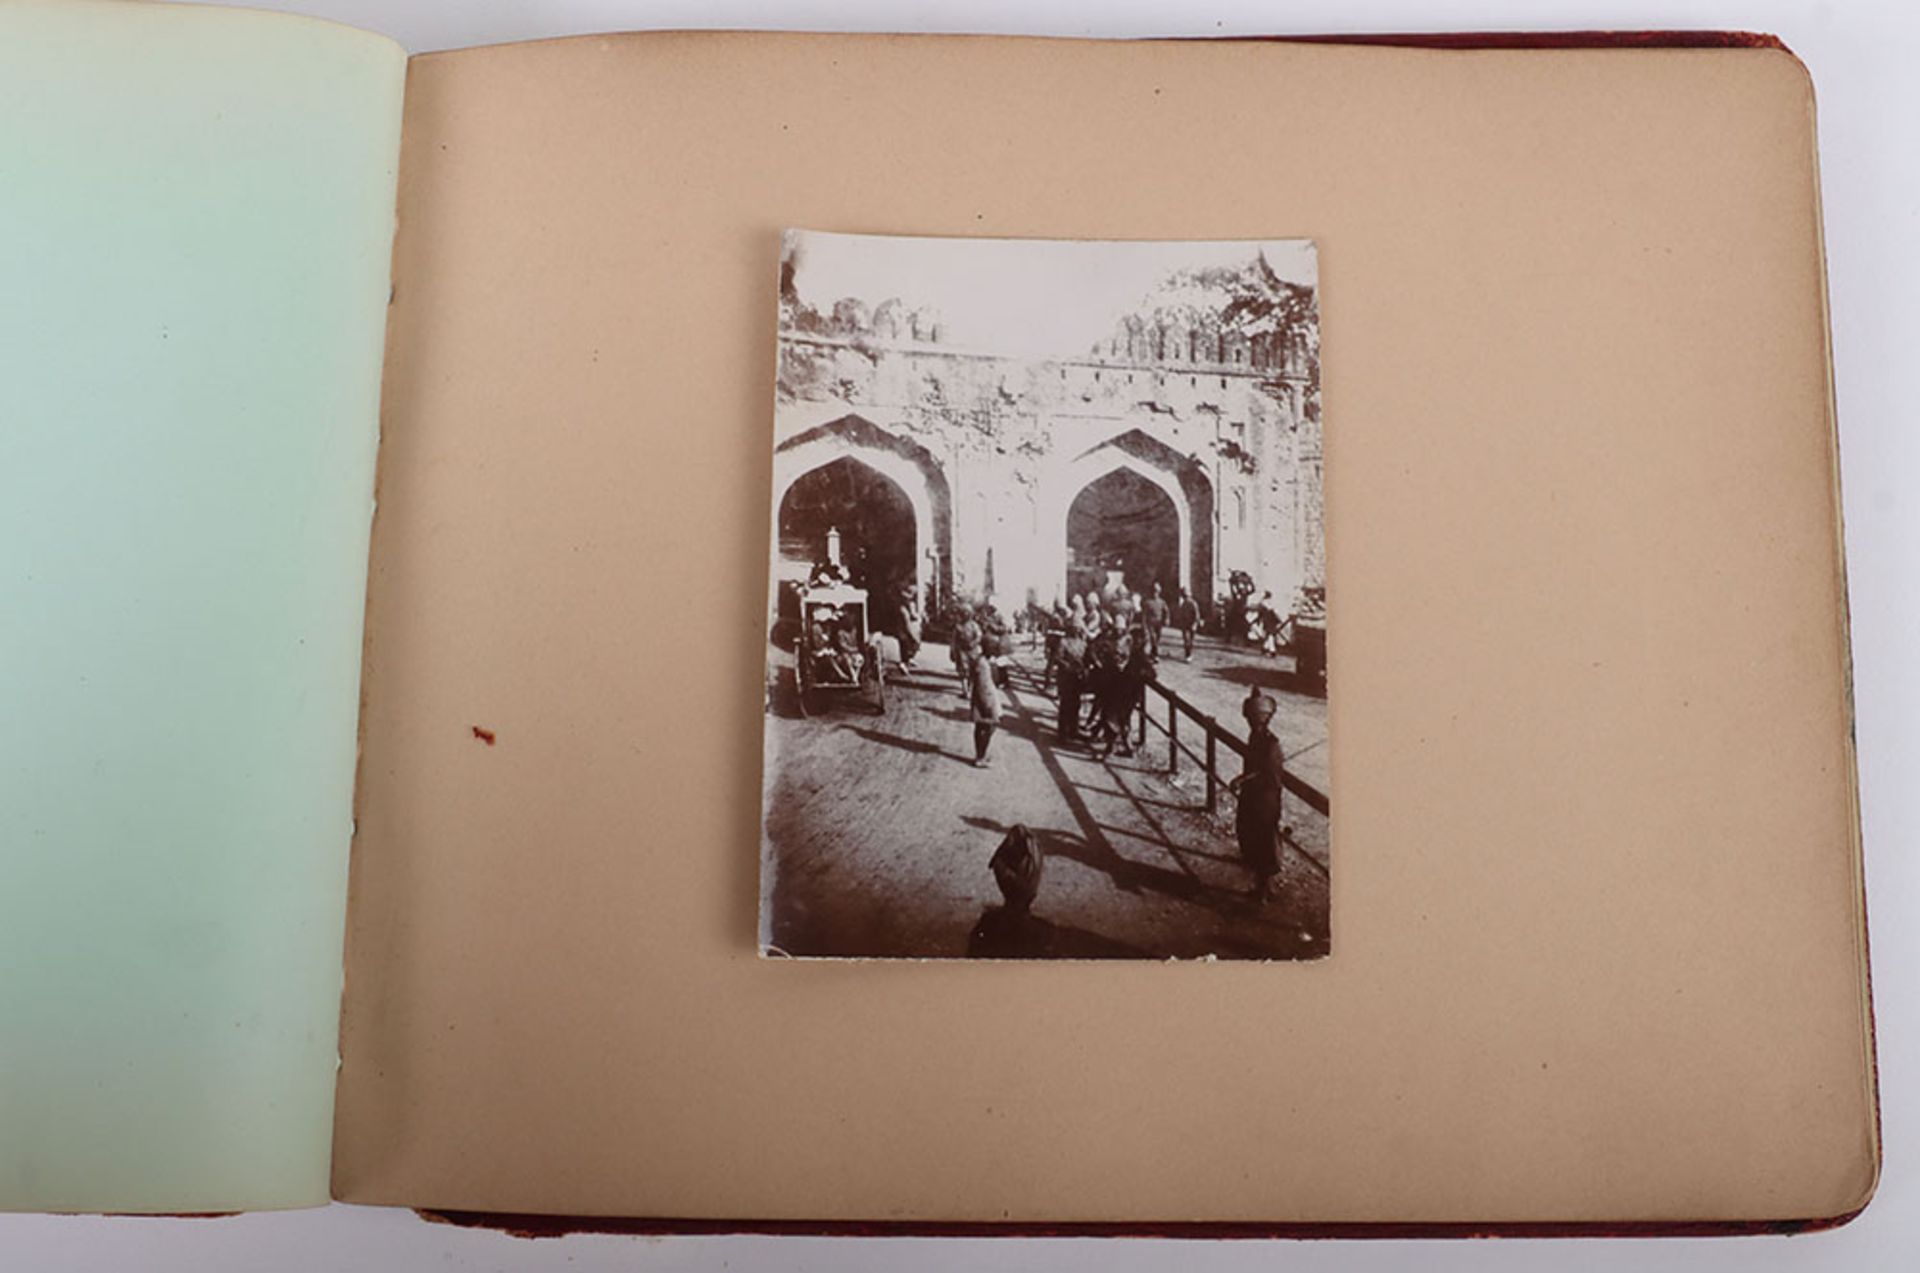 Photograph Album with images of ther Delhi Durbar, troops lining streets, Elephants, sacred cows bel - Bild 39 aus 48